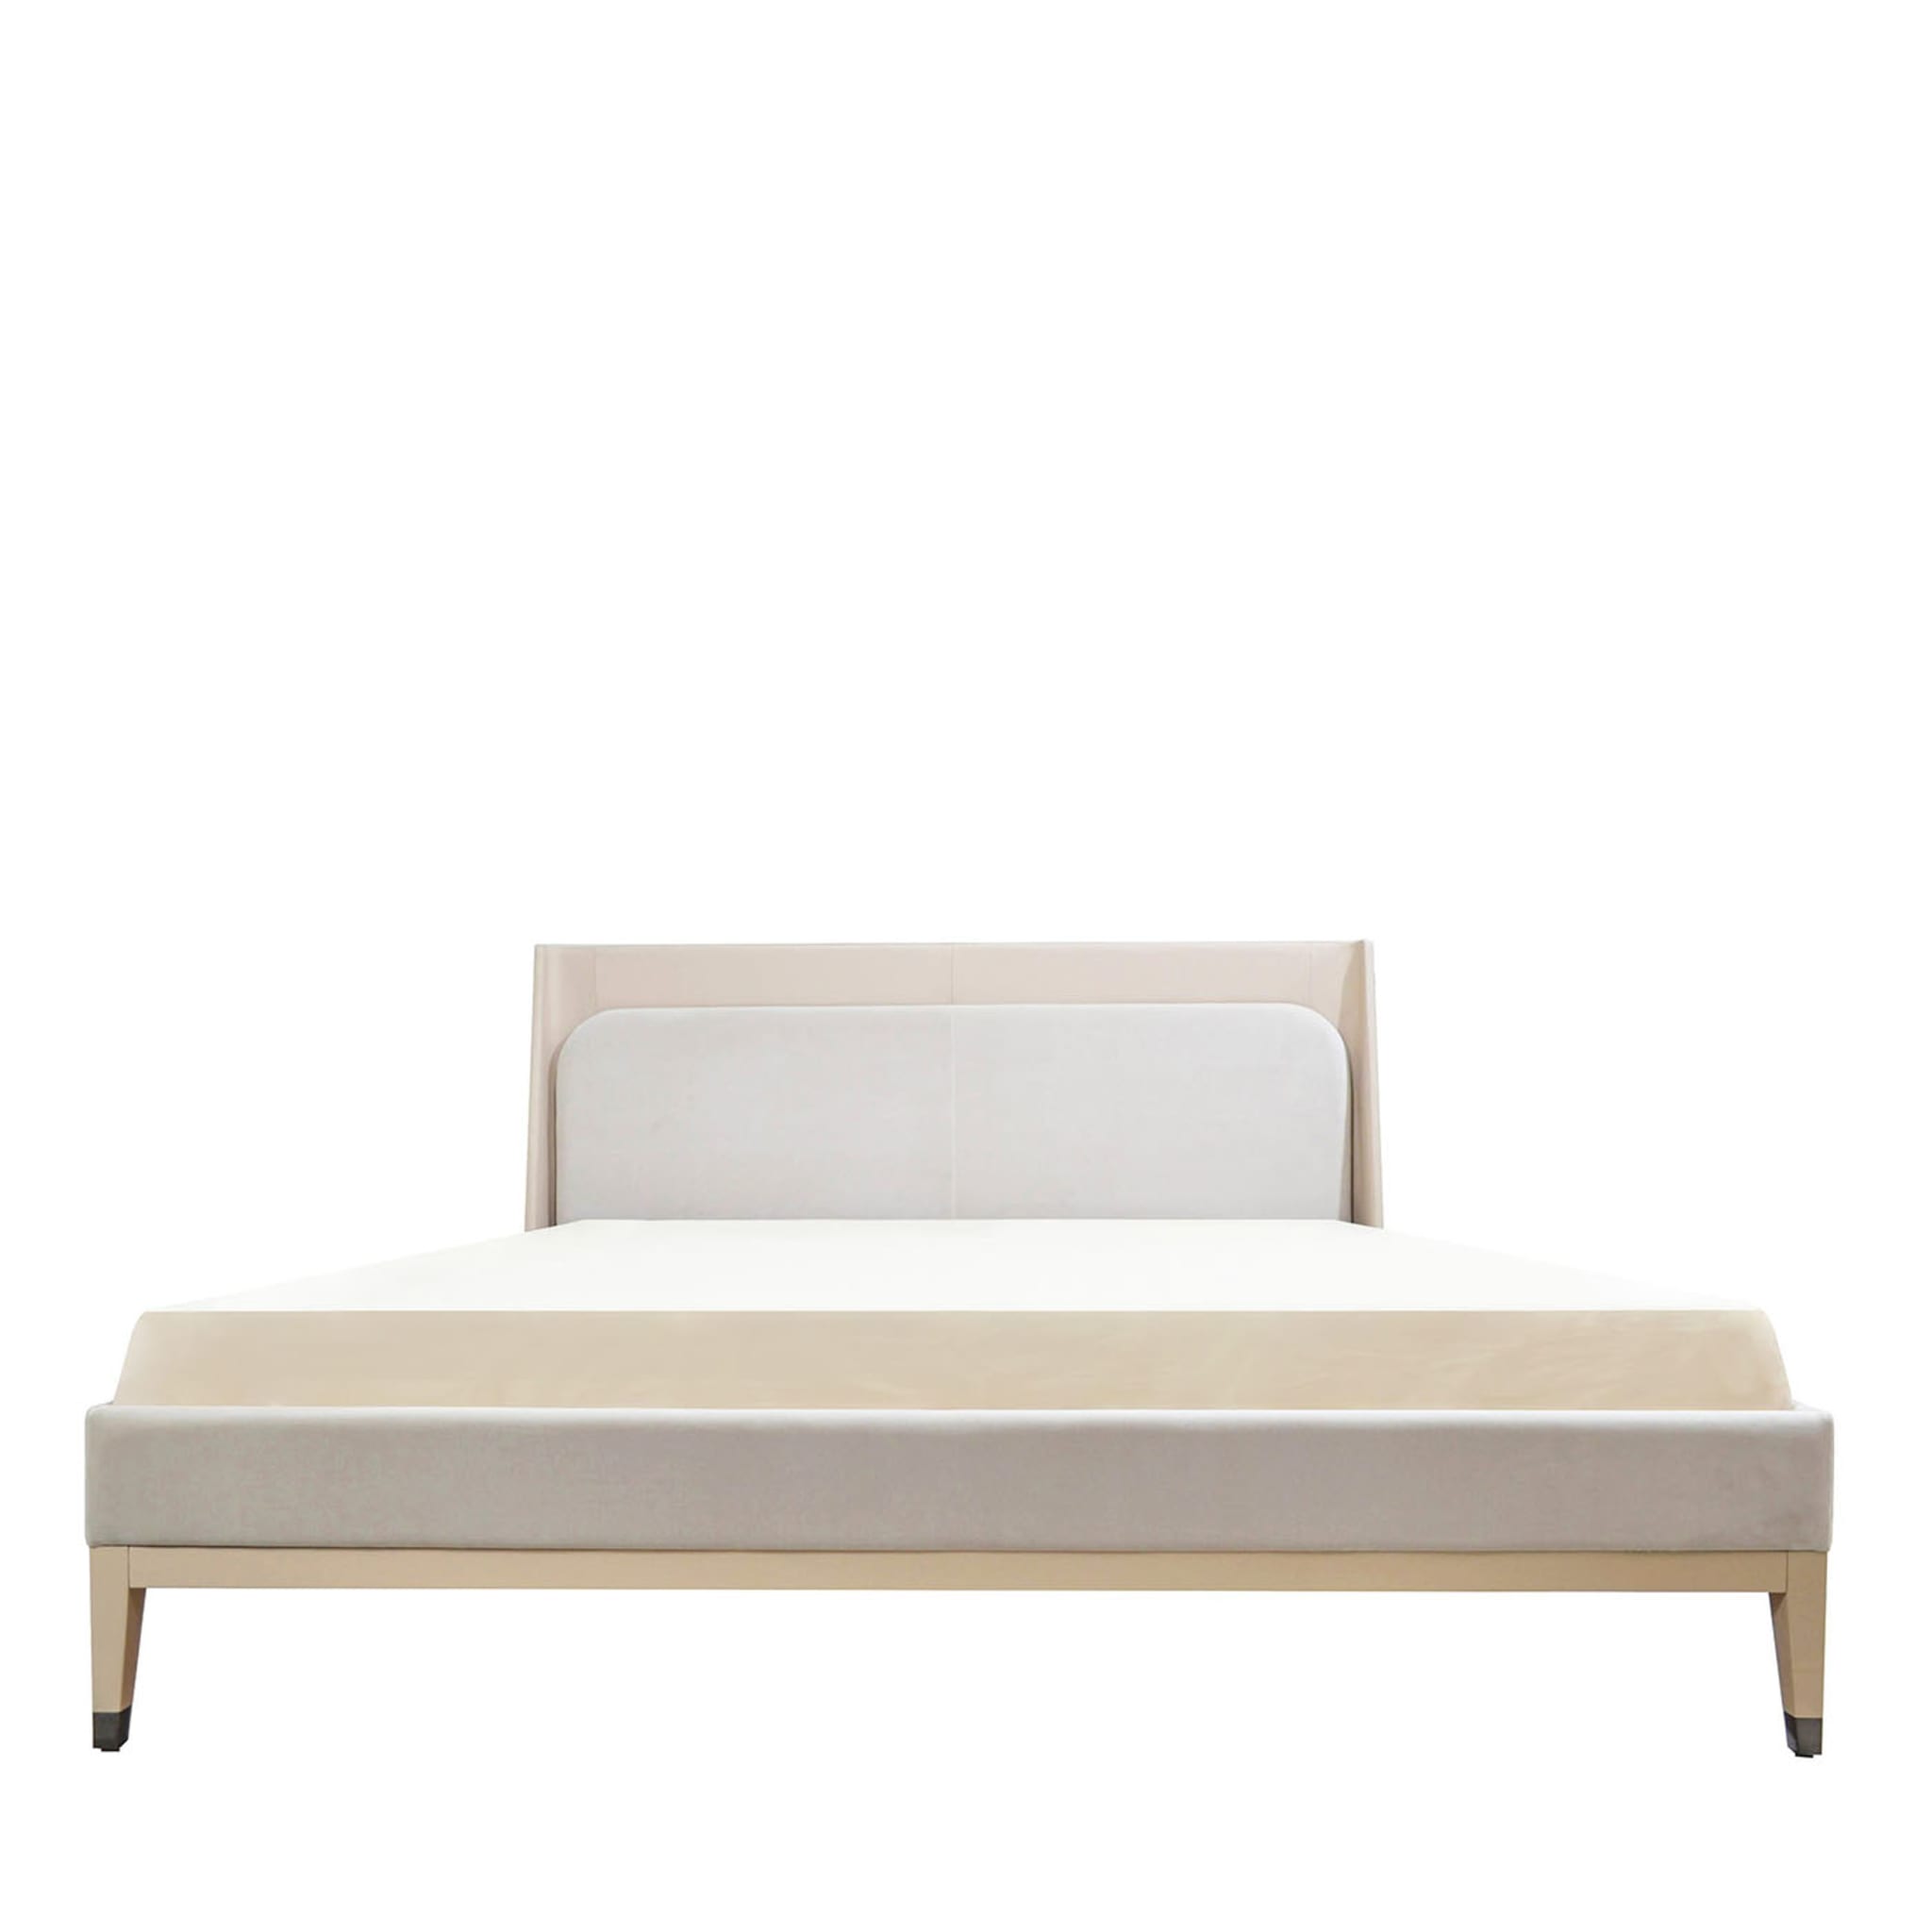 Italian Bed Upholstered Nubuck and Velvet with Wooden Legs - Main view